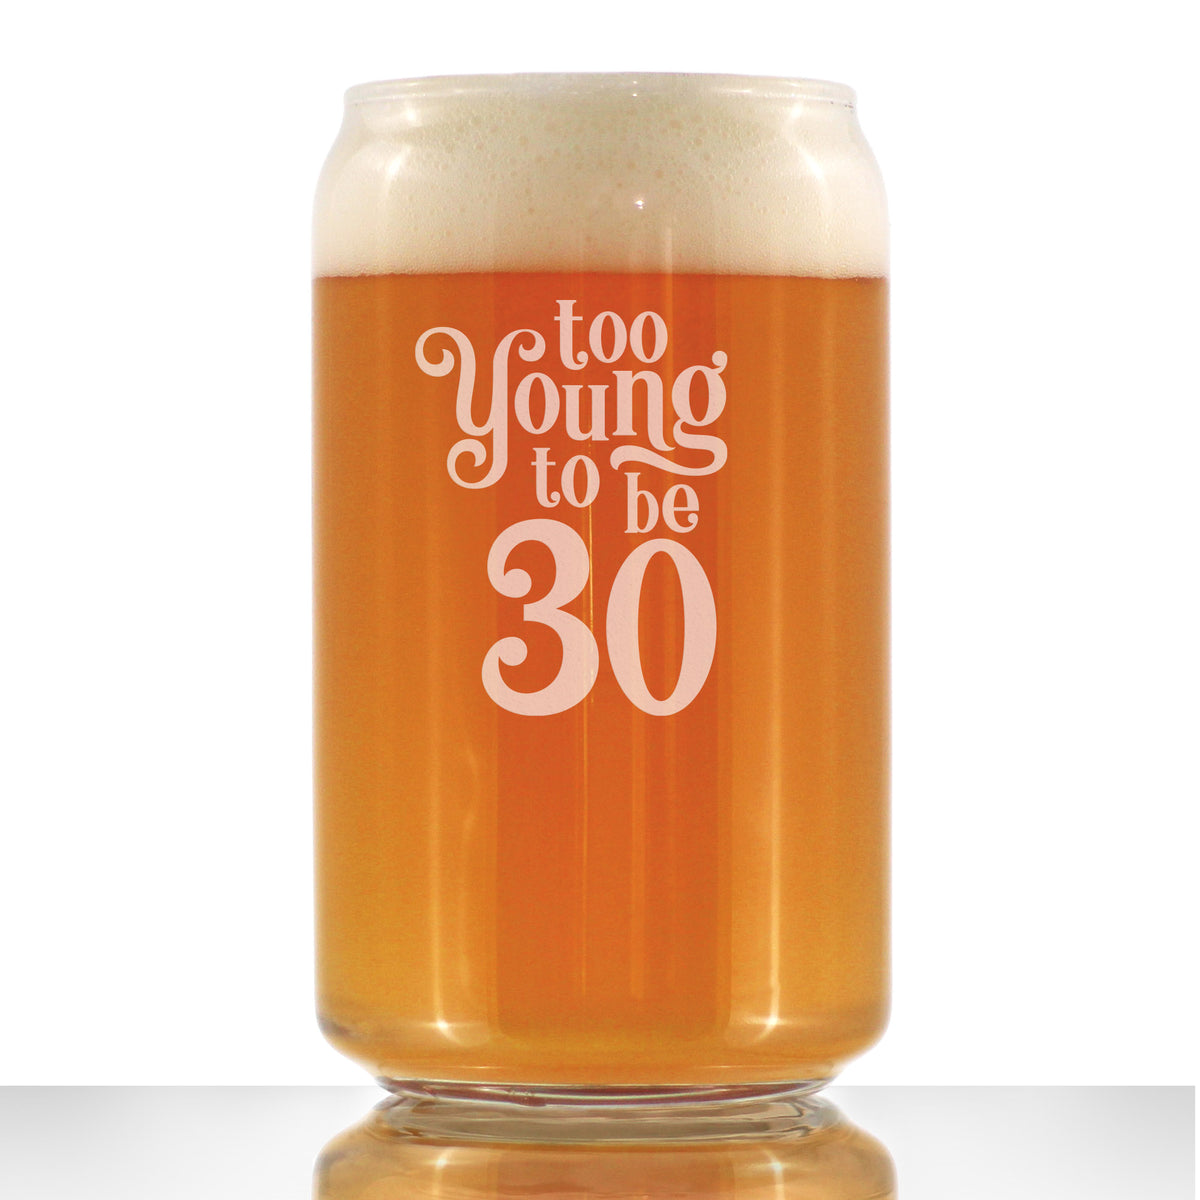 Too Young to Be 30 - Funny 16 oz Beer Can Pint Glass - 30th Birthday Gifts for Men or Women Turning 30 - Bday Party Decor